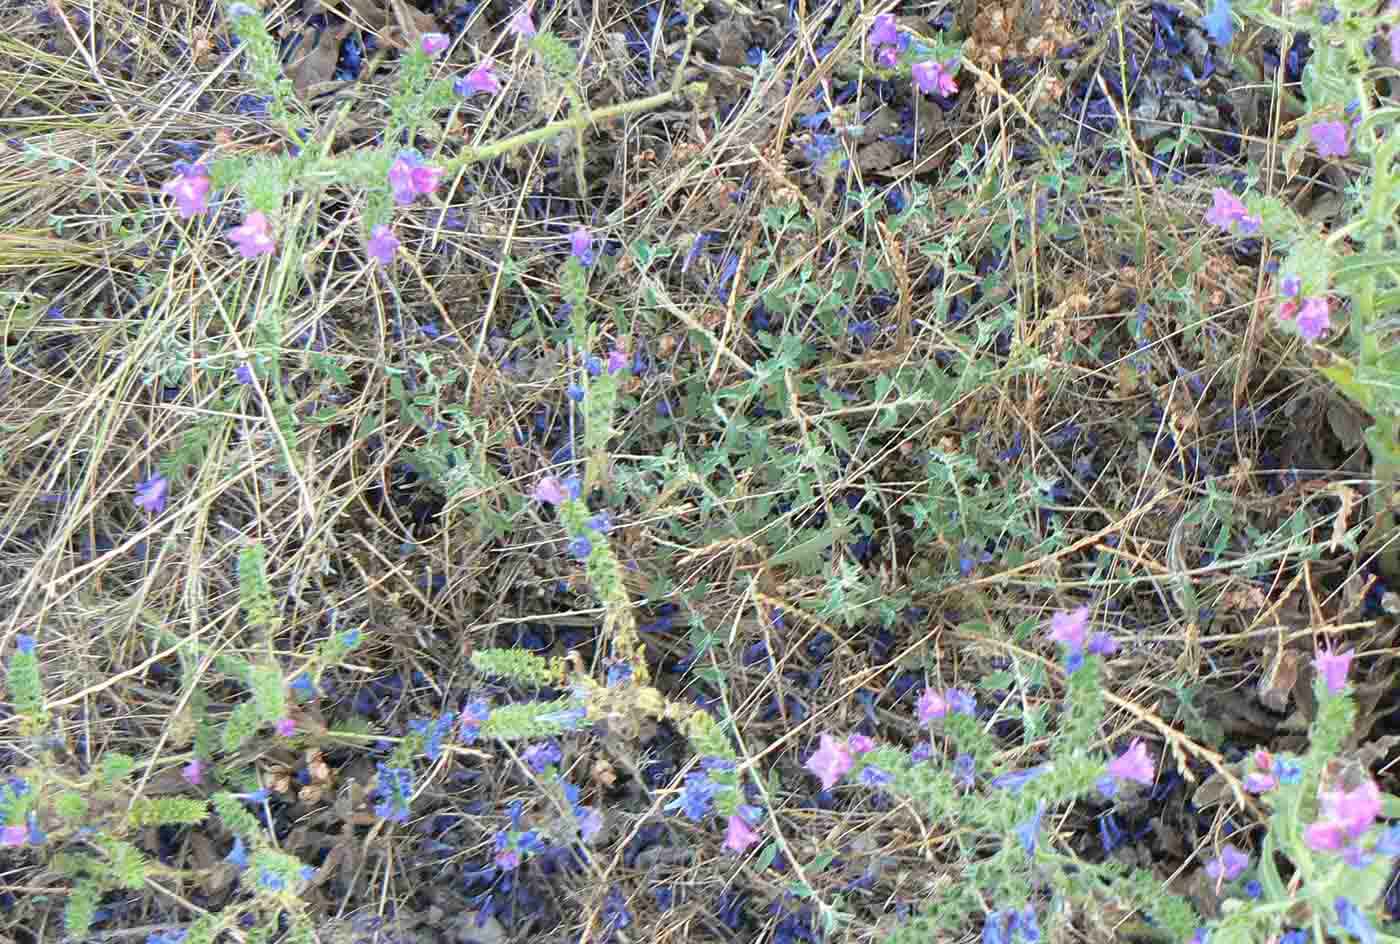 A patch of Paterson's curse - a creeping saltbush plant with grey foliage and small purple flowers.